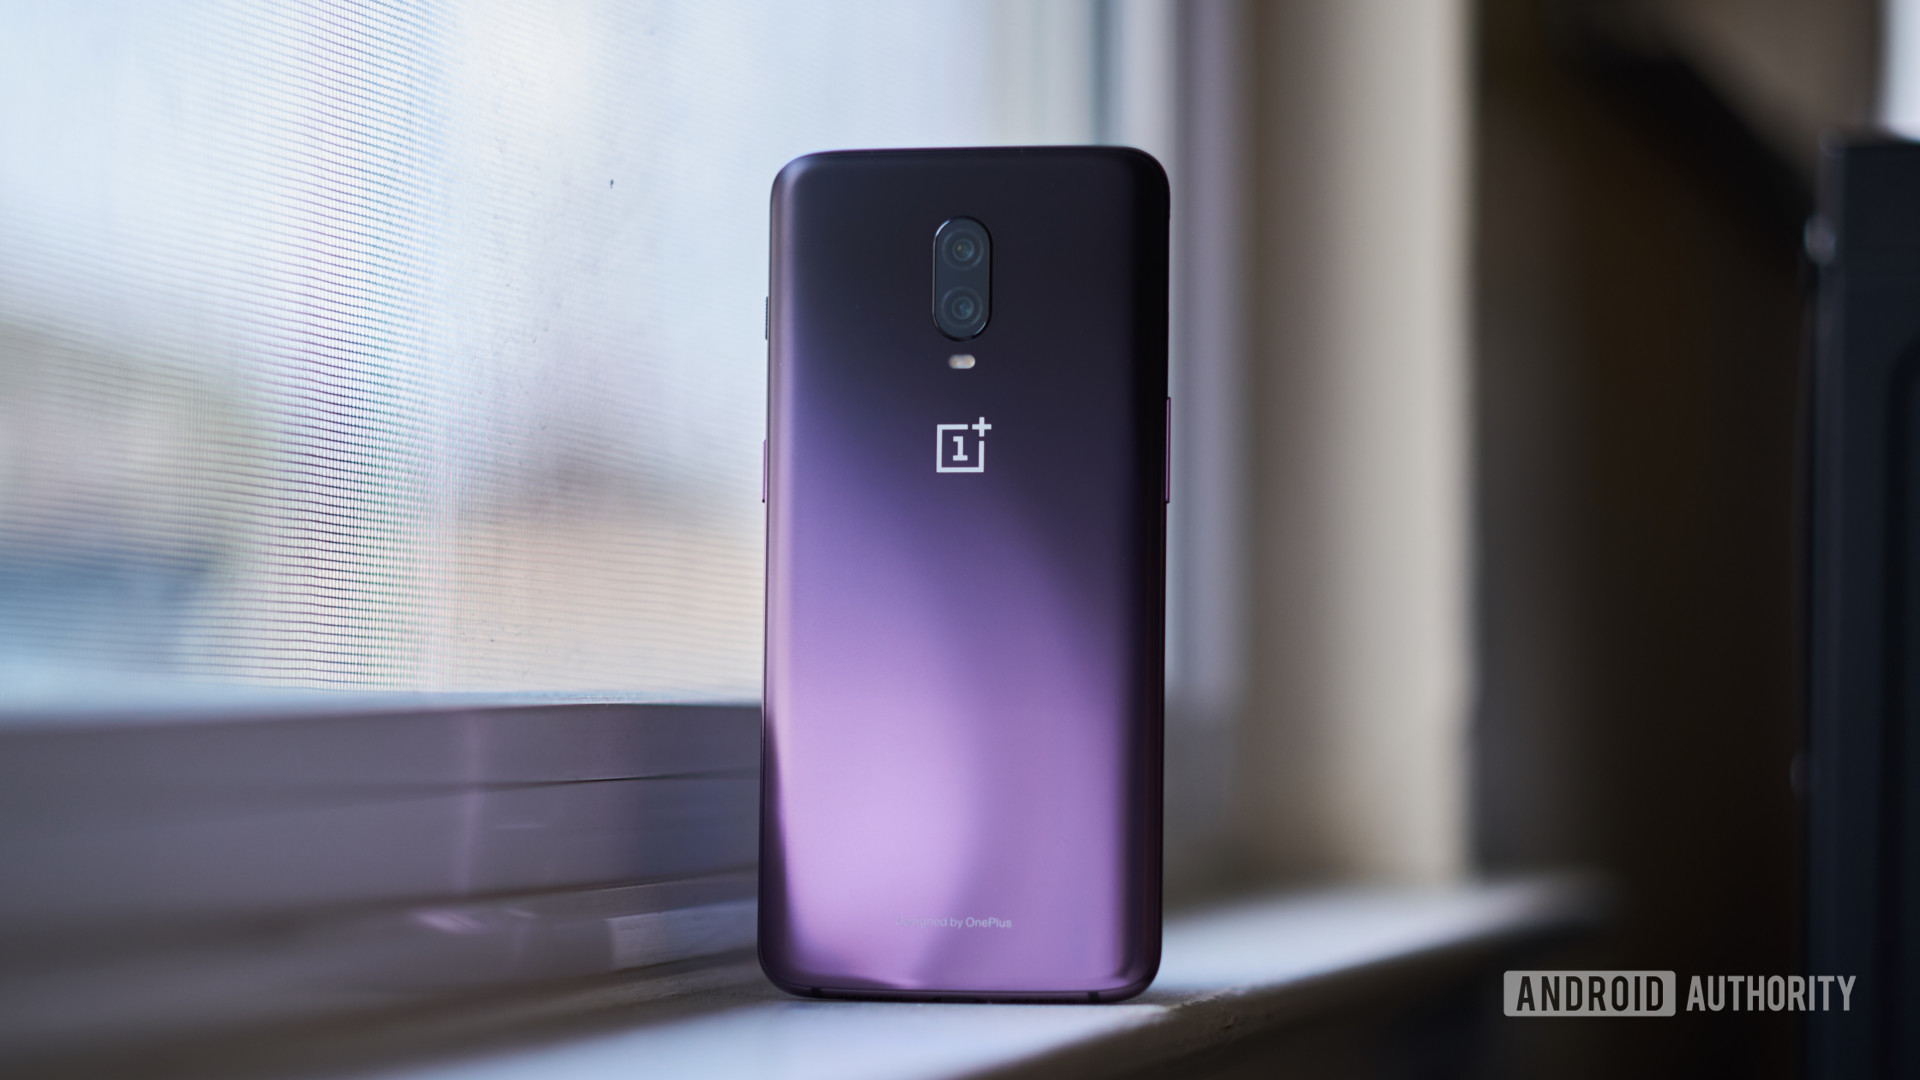 The OnePlus 6T in Thunder Purple from behind.